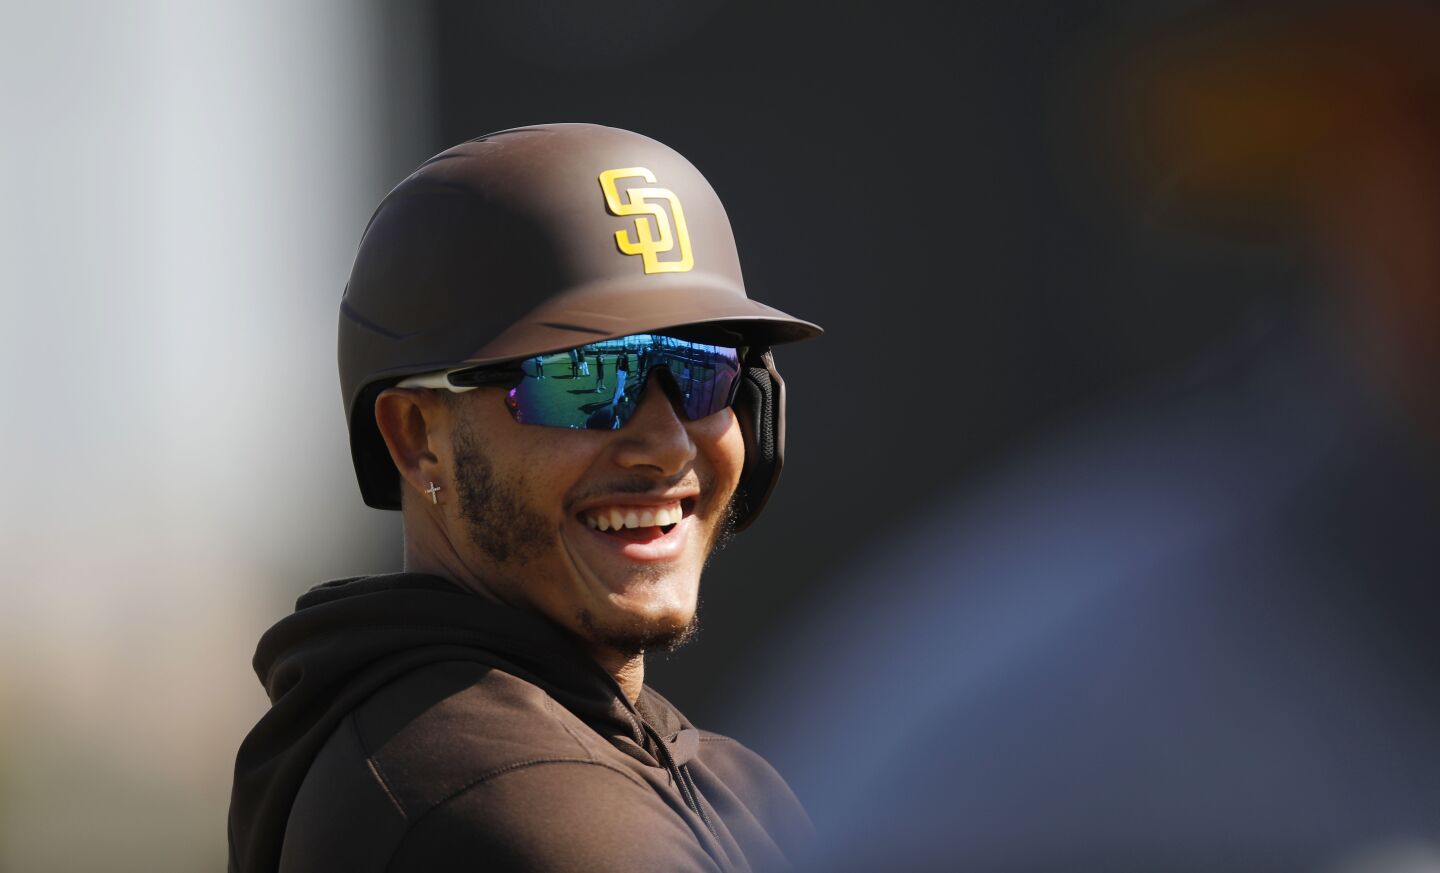 San Diego Padres Manny Machado waits to bat during a spring training practice on Feb. 18, 2020.